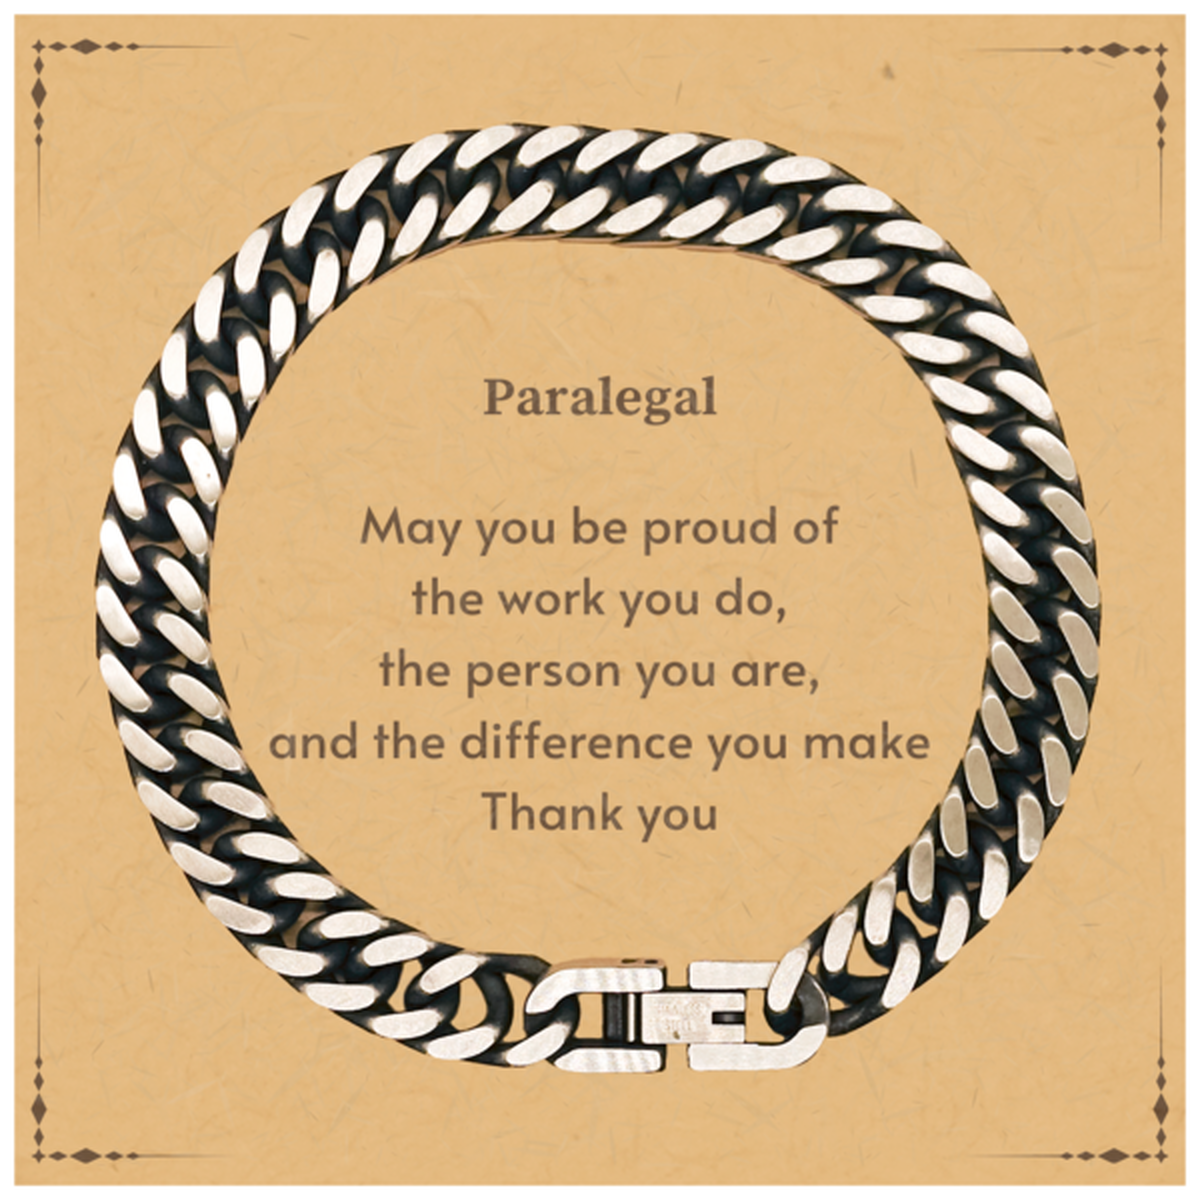 Heartwarming Cuban Link Chain Bracelet Retirement Coworkers Gifts for Paralegal, Paralegal May You be proud of the work you do, the person you are Gifts for Boss Men Women Friends